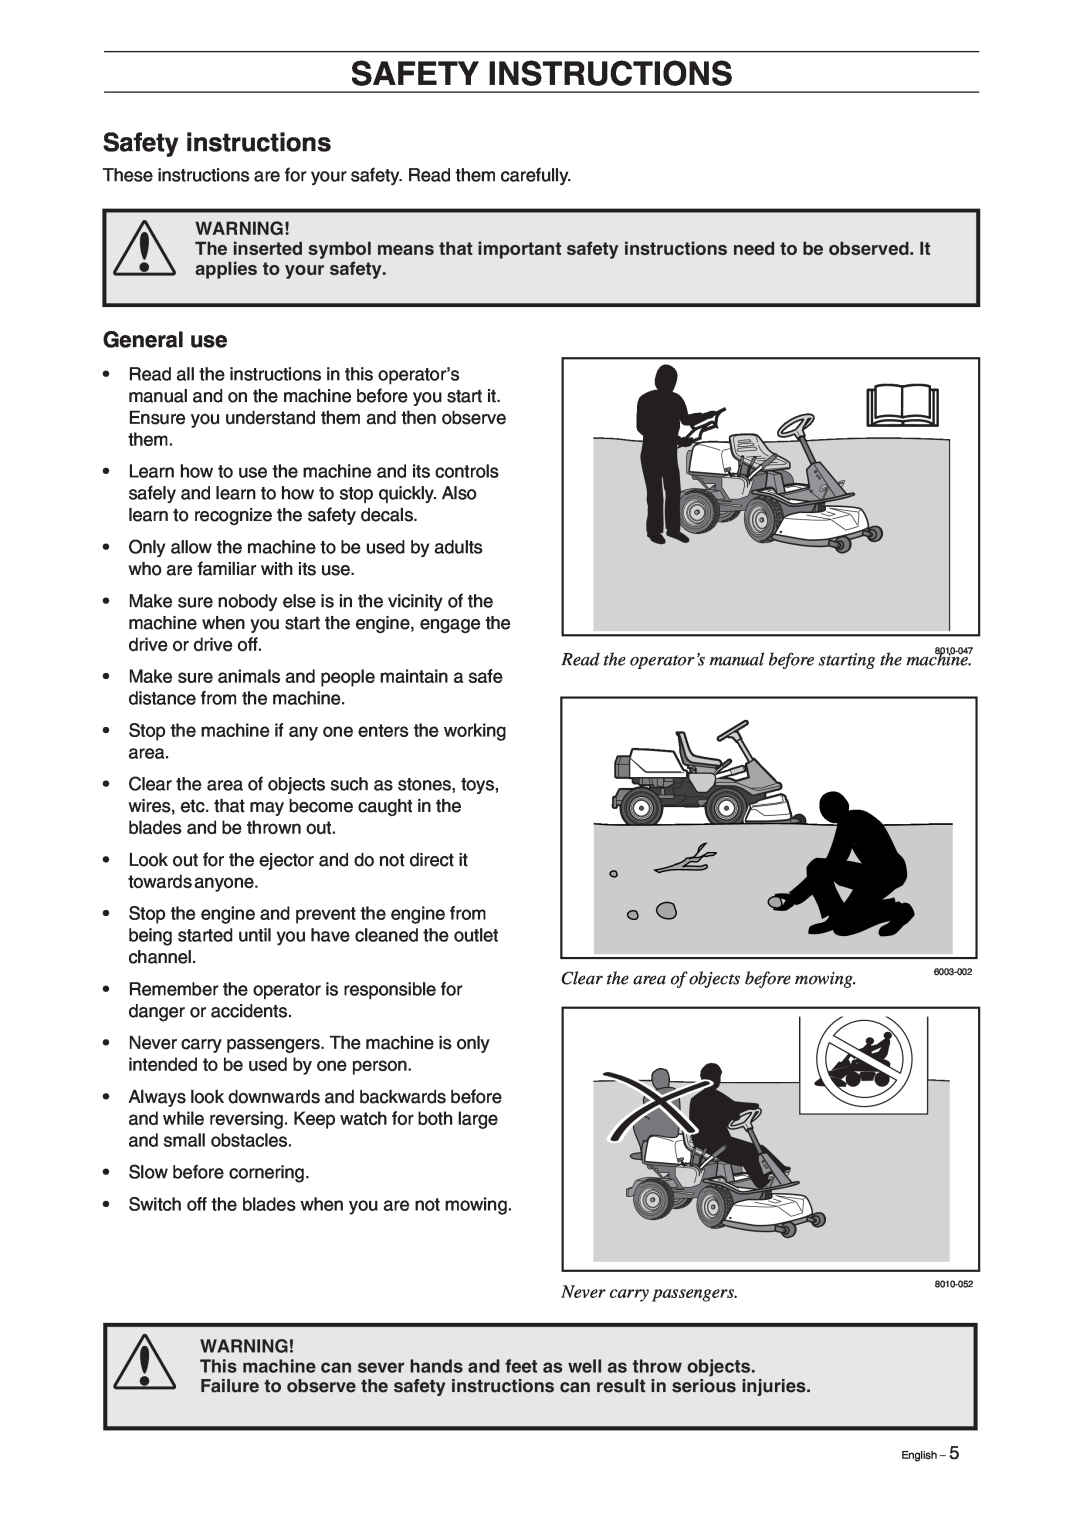 Husqvarna 13 Safety instructions, General use, Read the operator’s manual before starting the machine, Safety Instructions 